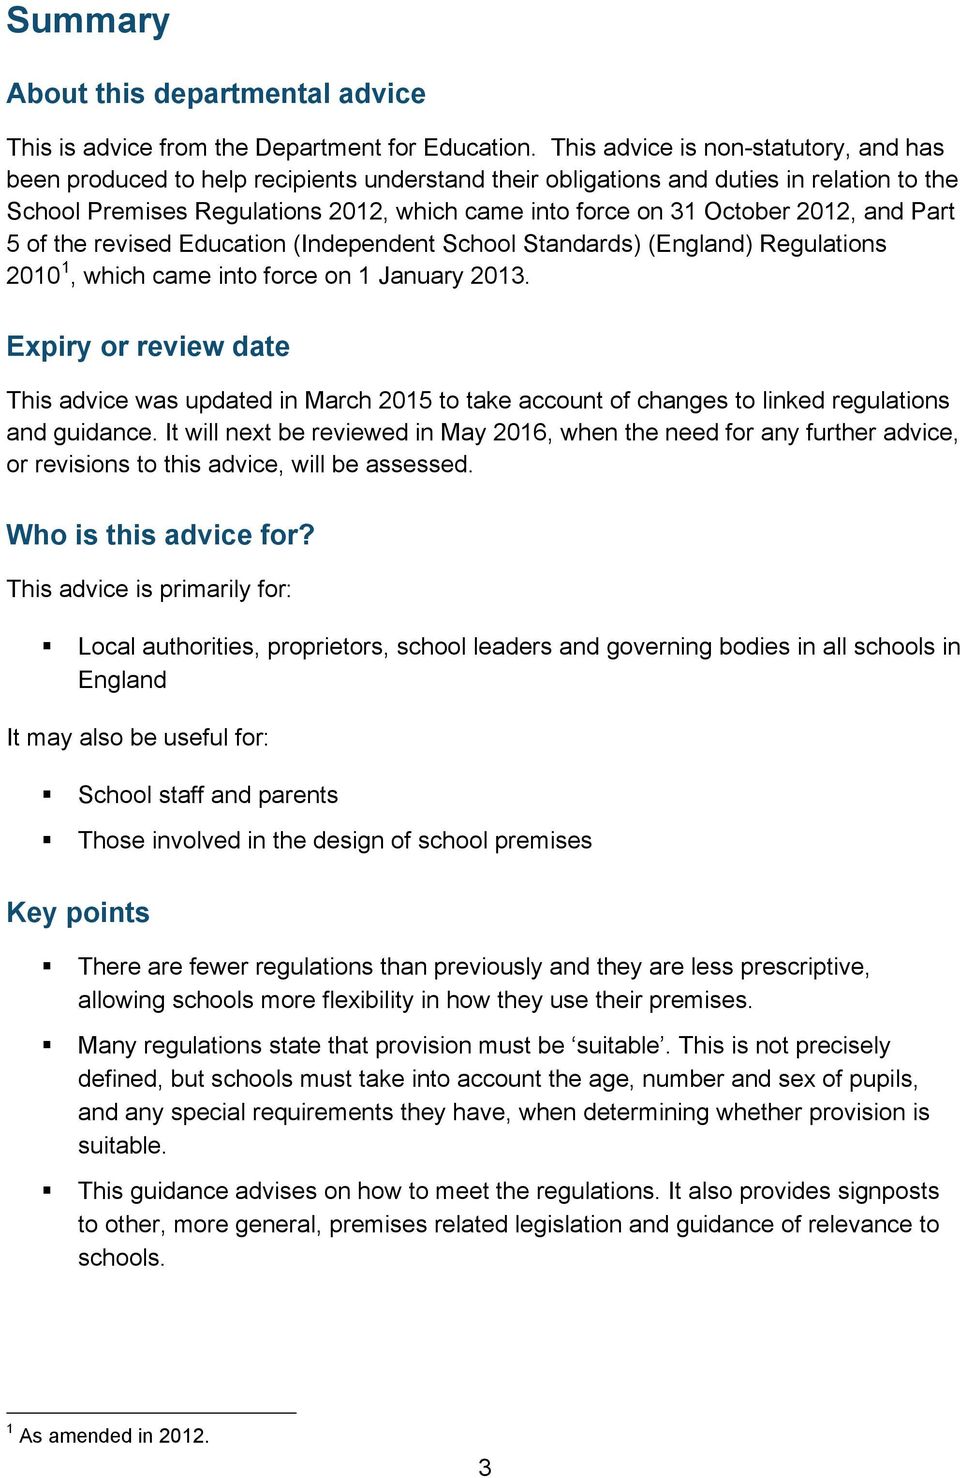 2012, and Part 5 of the revised Education (Independent School Standards) (England) Regulations 2010 1, which came into force on 1 January 2013.